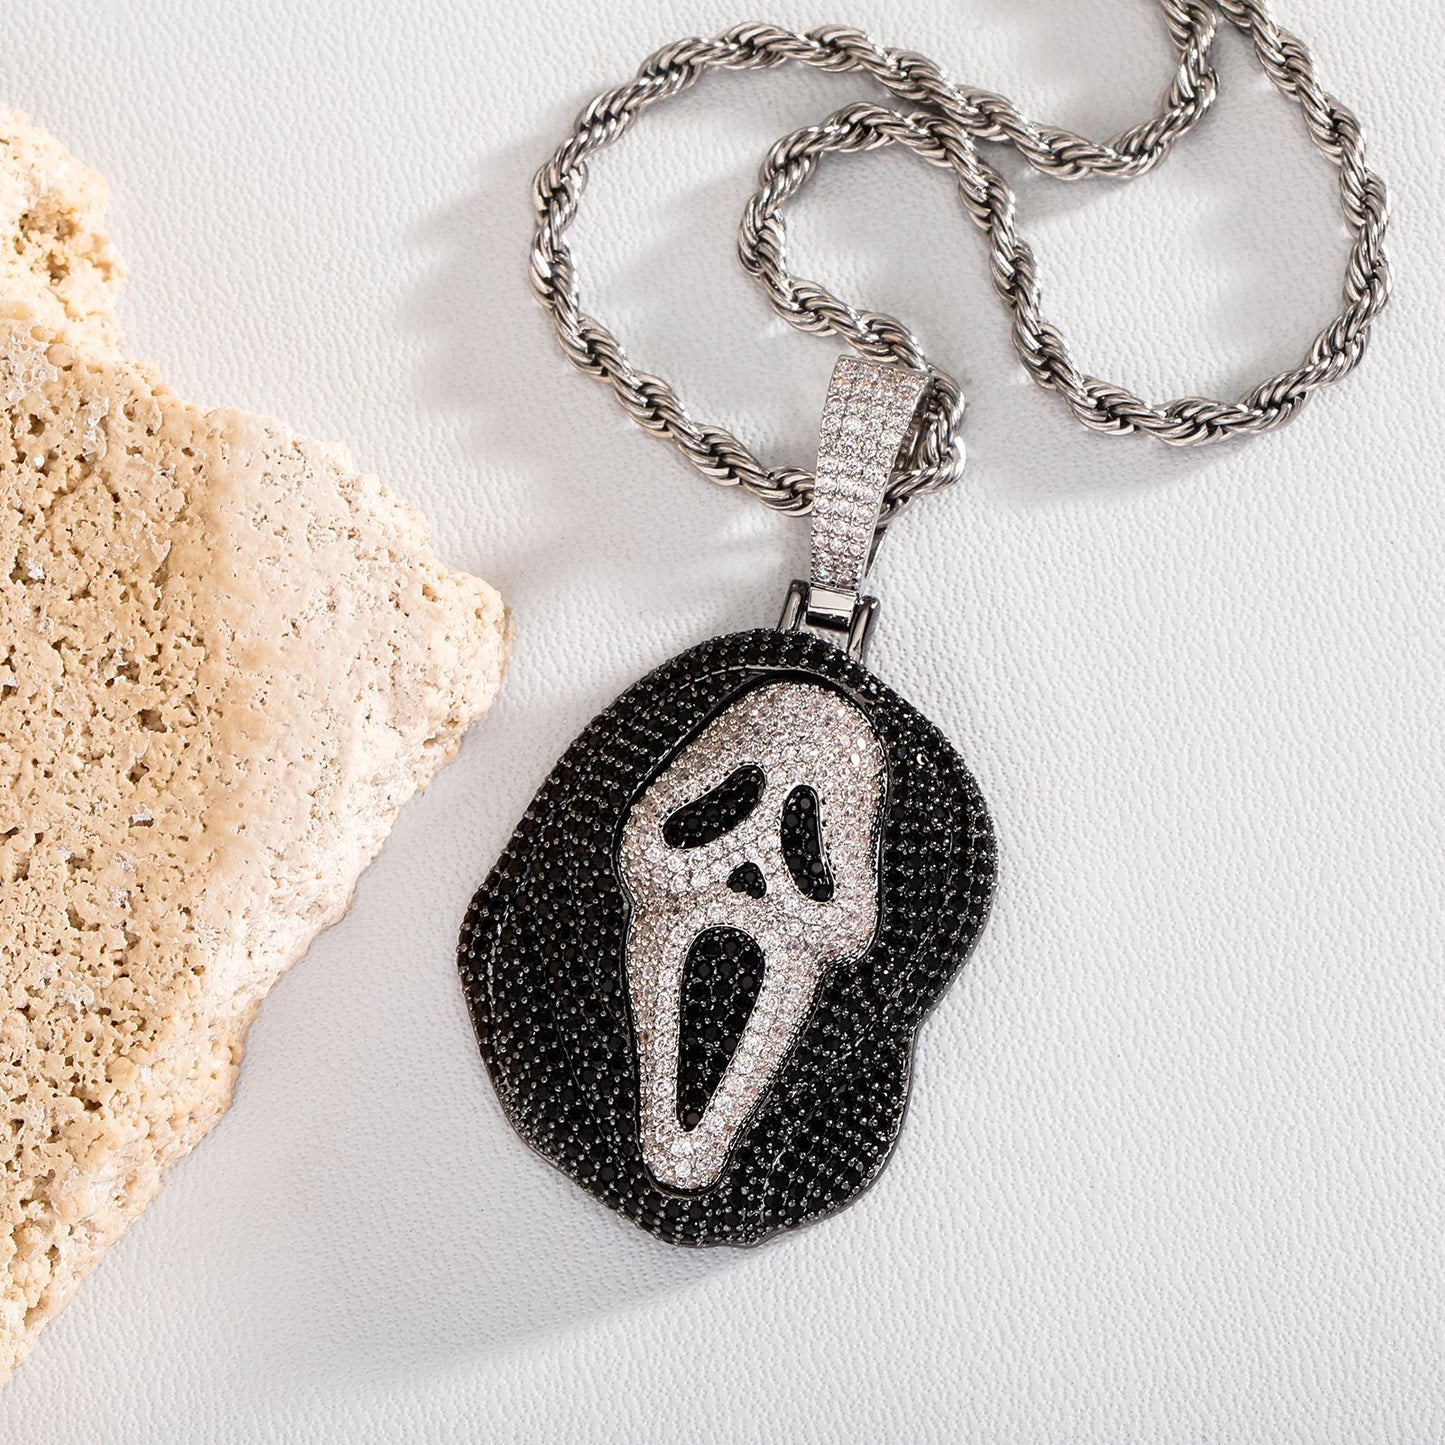 Ghost Ghost personalized hip-hop pendant full of zircon large necklace accessories